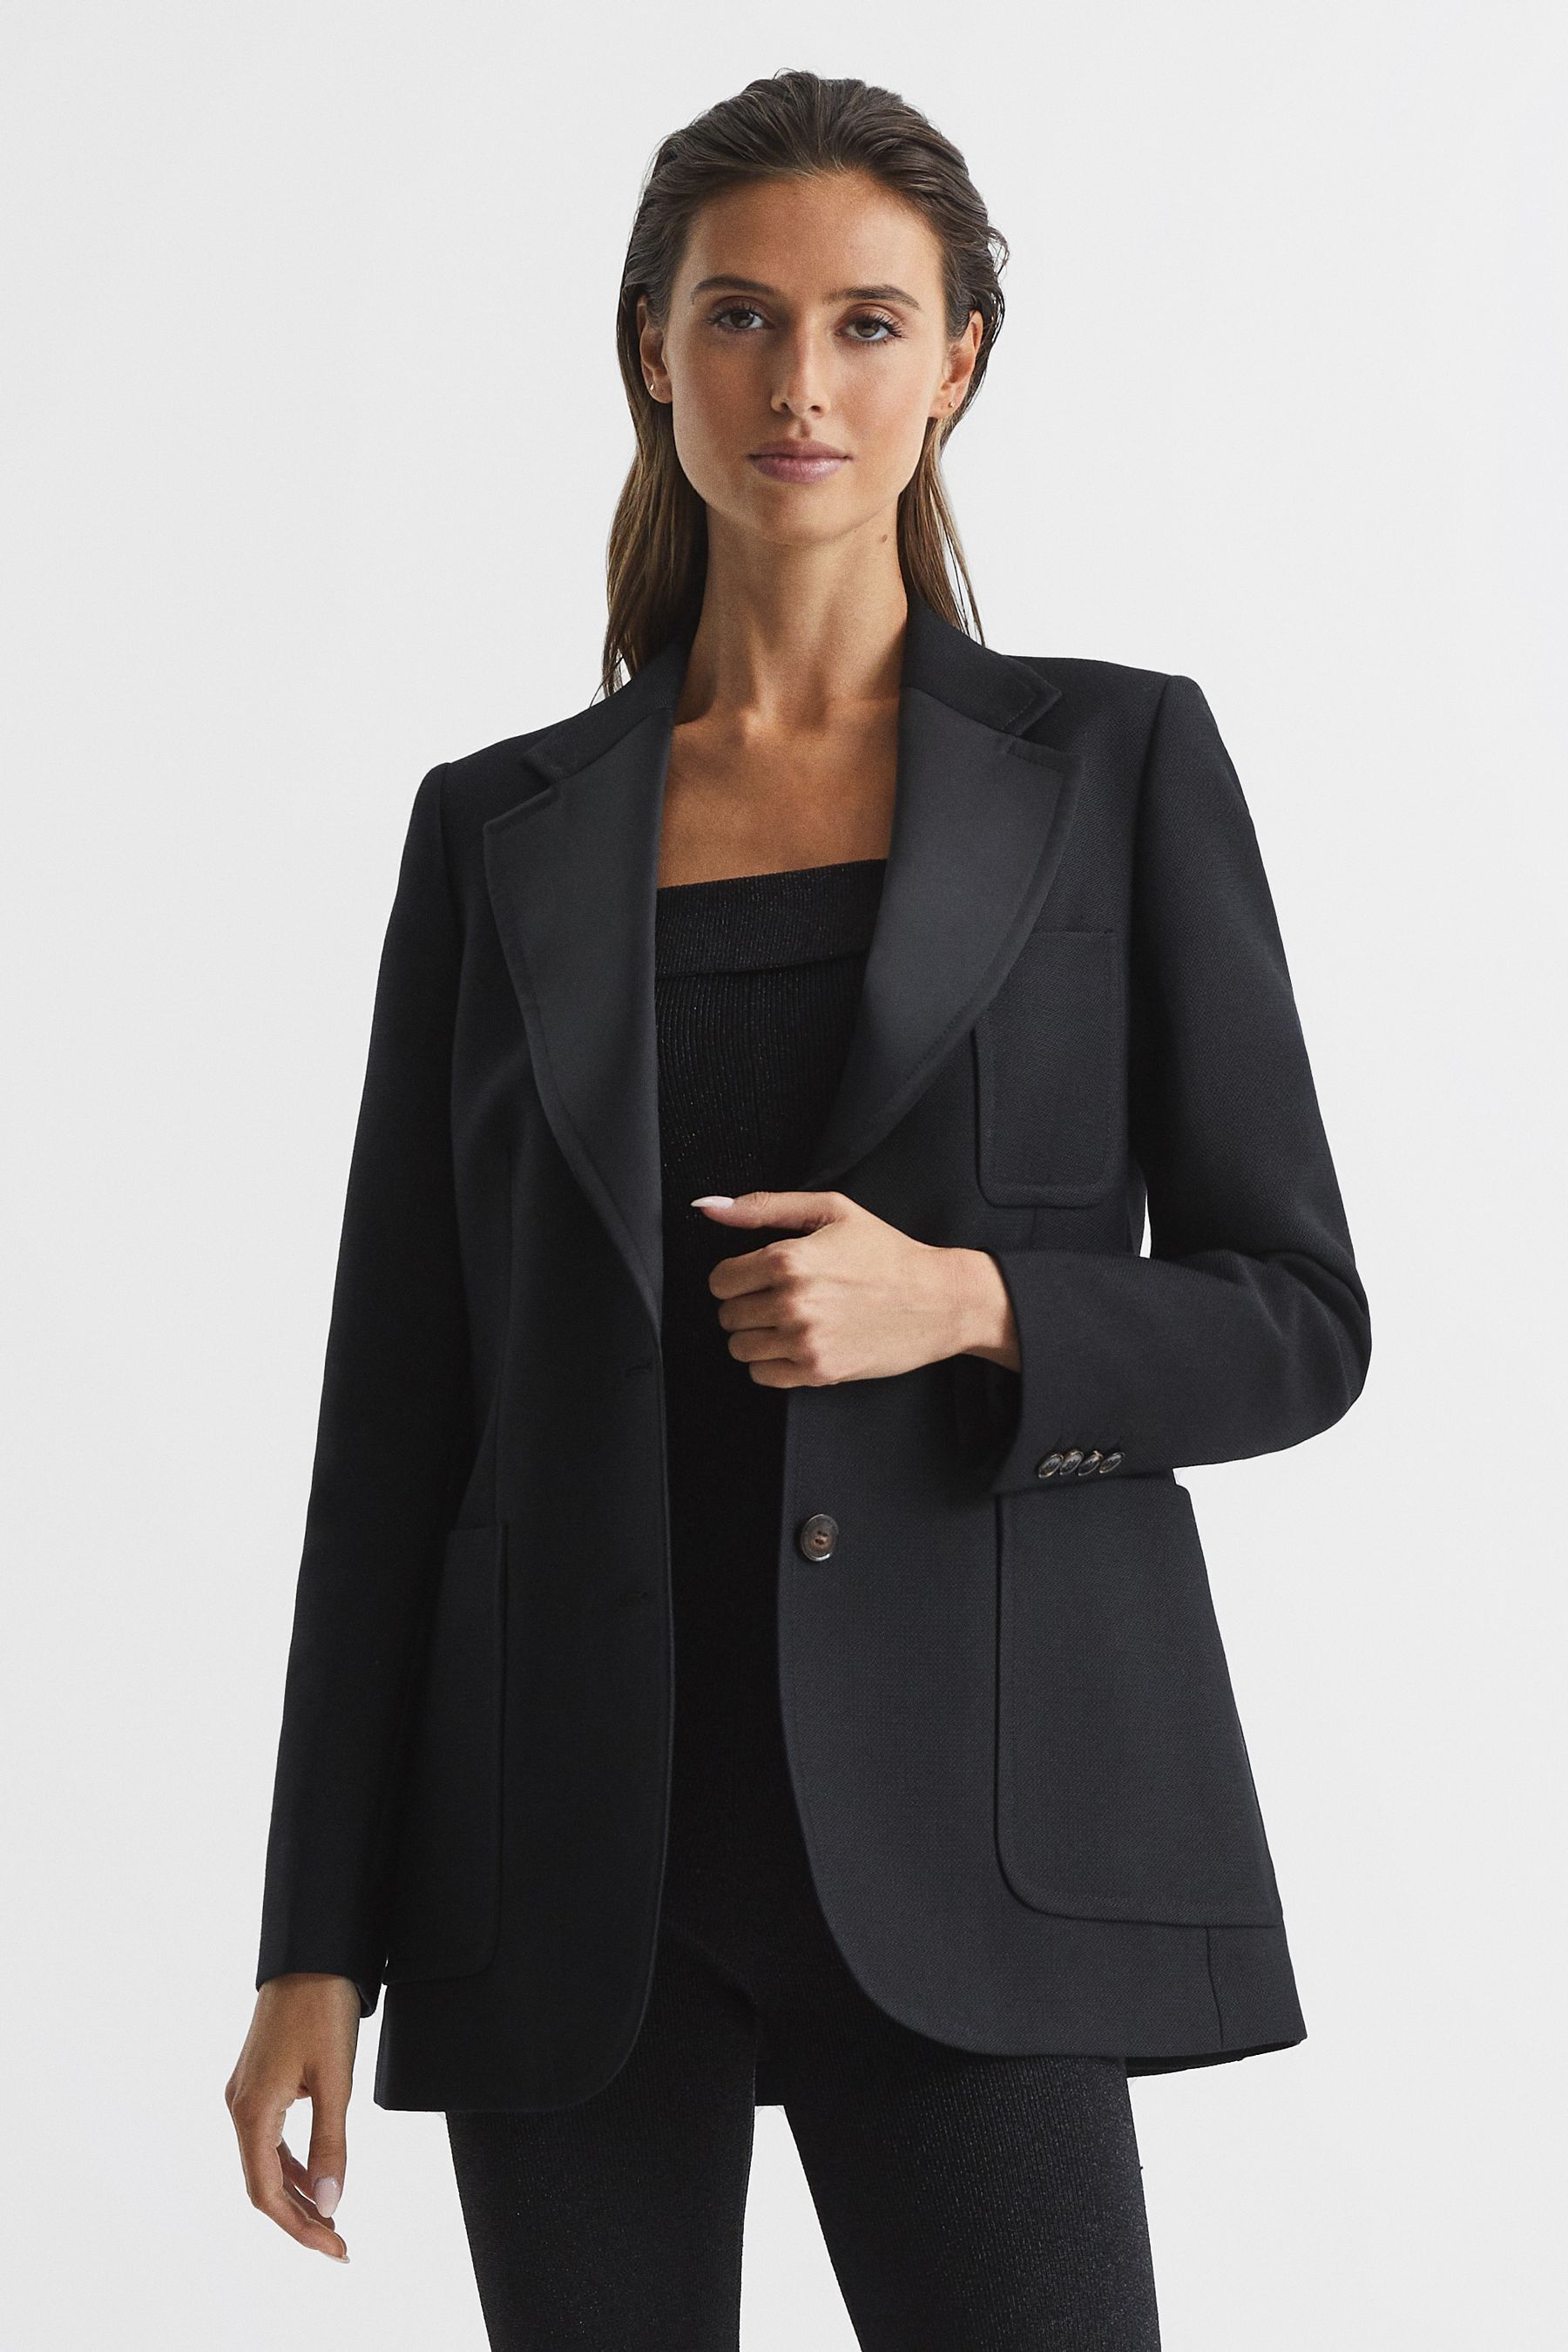 Buy Reiss Black Alana Single Breasted Tailored Blazer from the Next UK ...